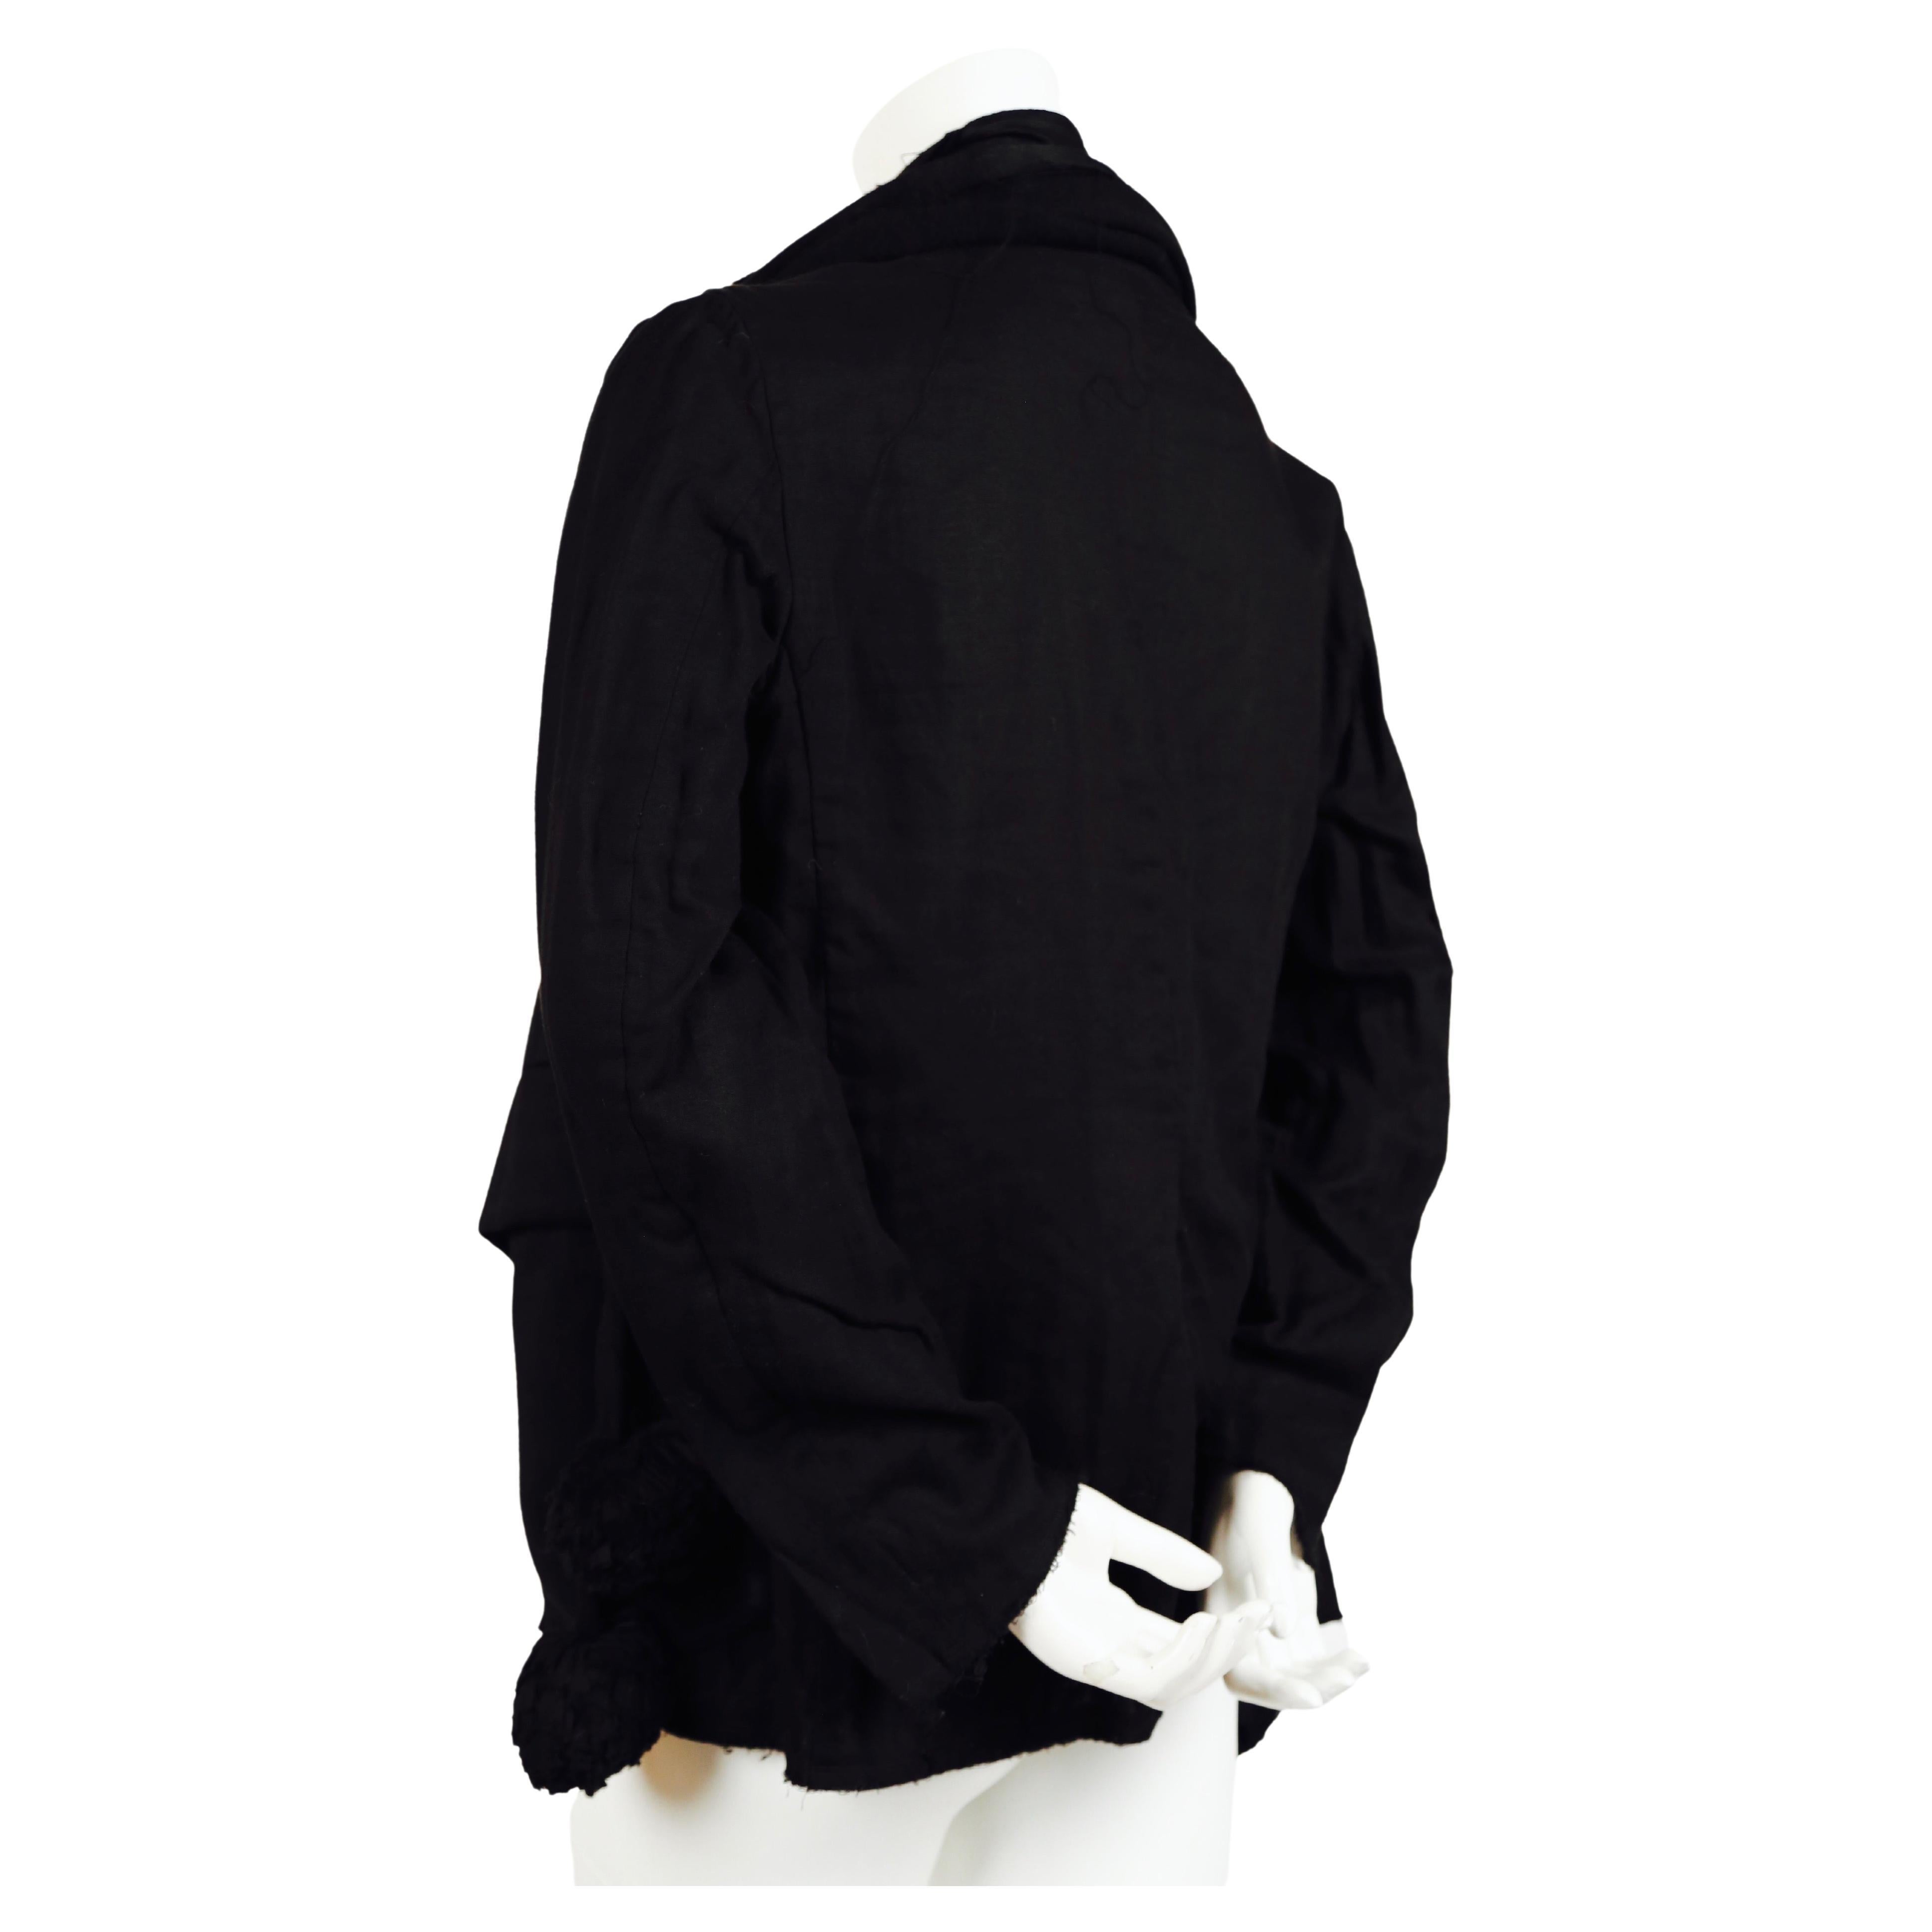 Black jacket with scarf overlay and pom pom details designed by Rei Kawakubo for Comme Des Garcons dating to spring of 2003. 'Scarf' can be worn completely over the shoulders/arms or gathered as shown. Jacket has a very unstructured fit. Raw edges